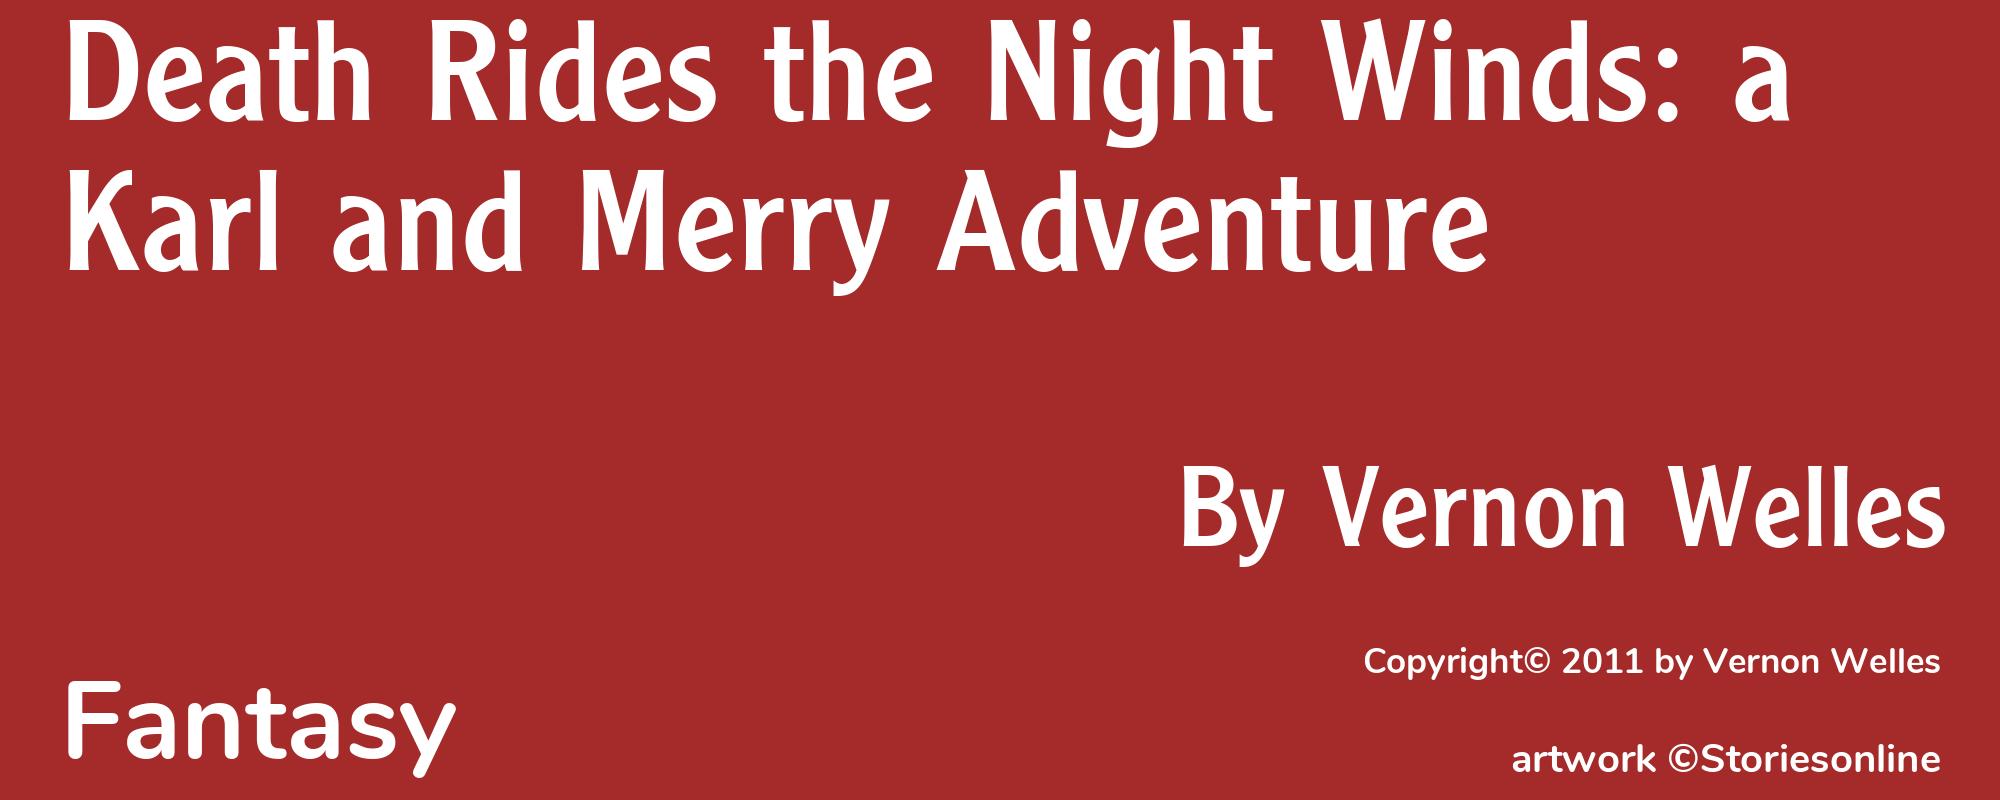 Death Rides the Night Winds: a Karl and Merry Adventure - Cover